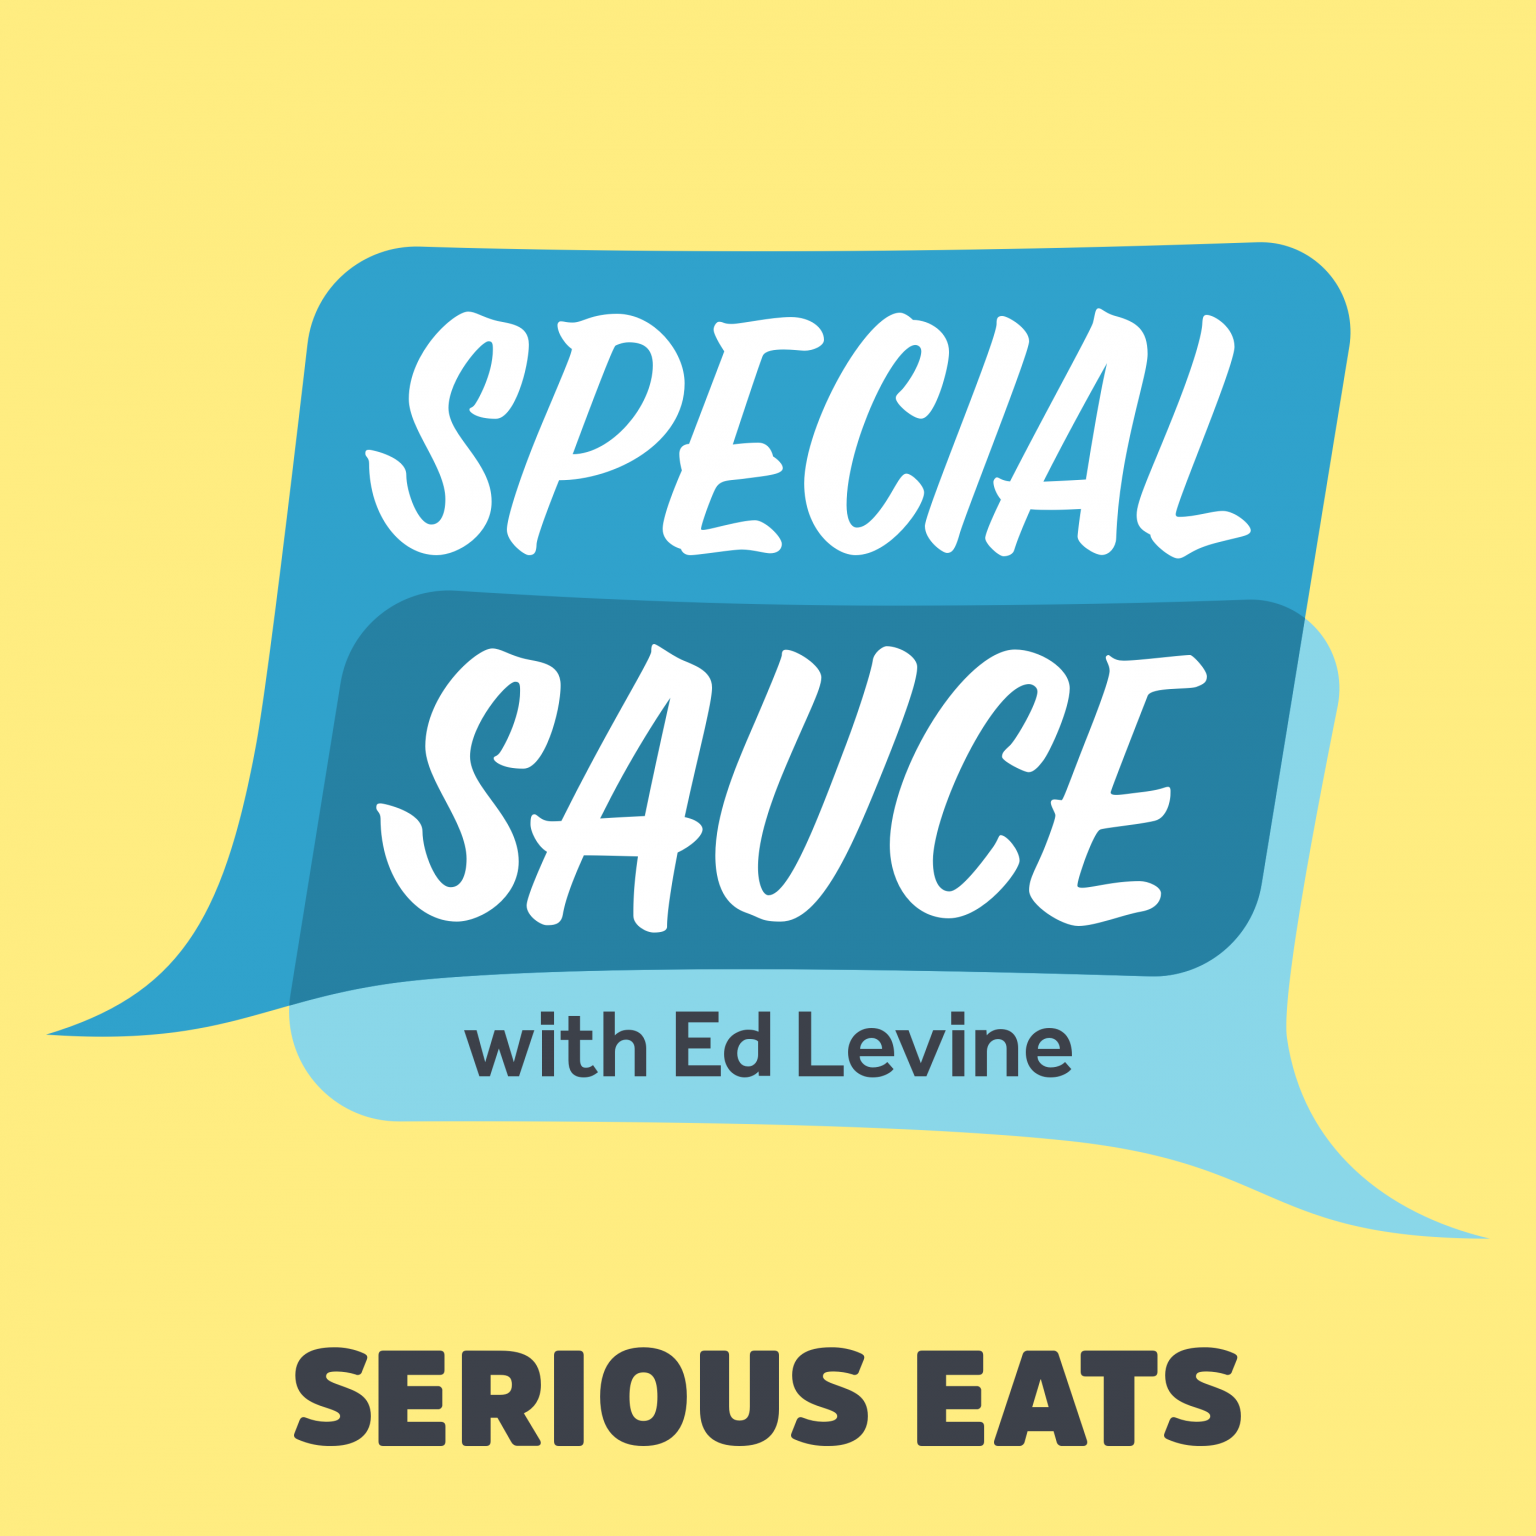 Special Sauce 2.0: Kenji on Grilling Naan and Nicholas Morgenstern on Sundaes [2/2]